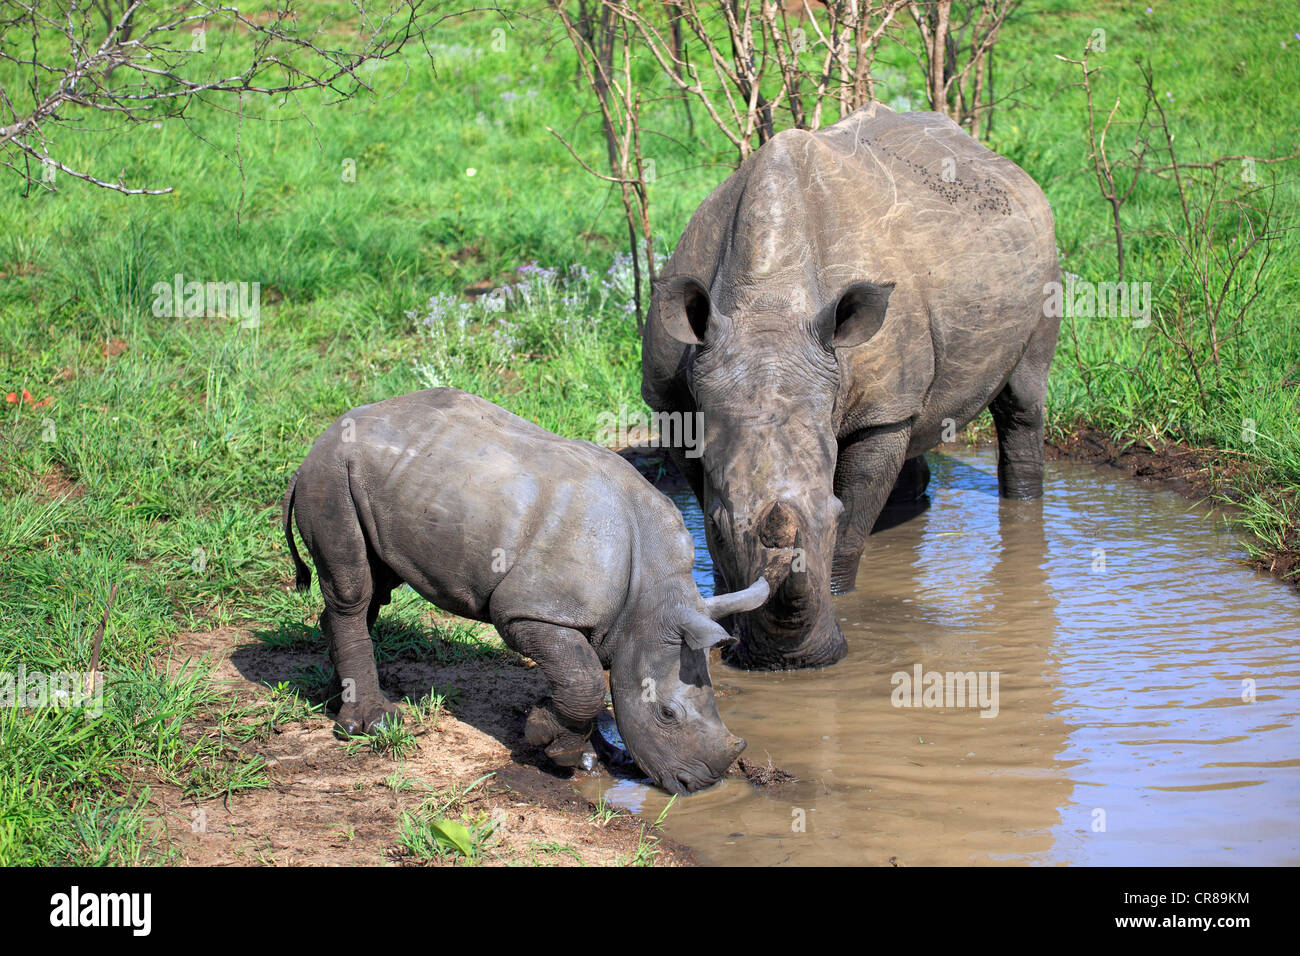 White Rhinoceros or Square-lipped rhinoceros (Ceratotherium simum), female and calf drinking at water hole Stock Photo